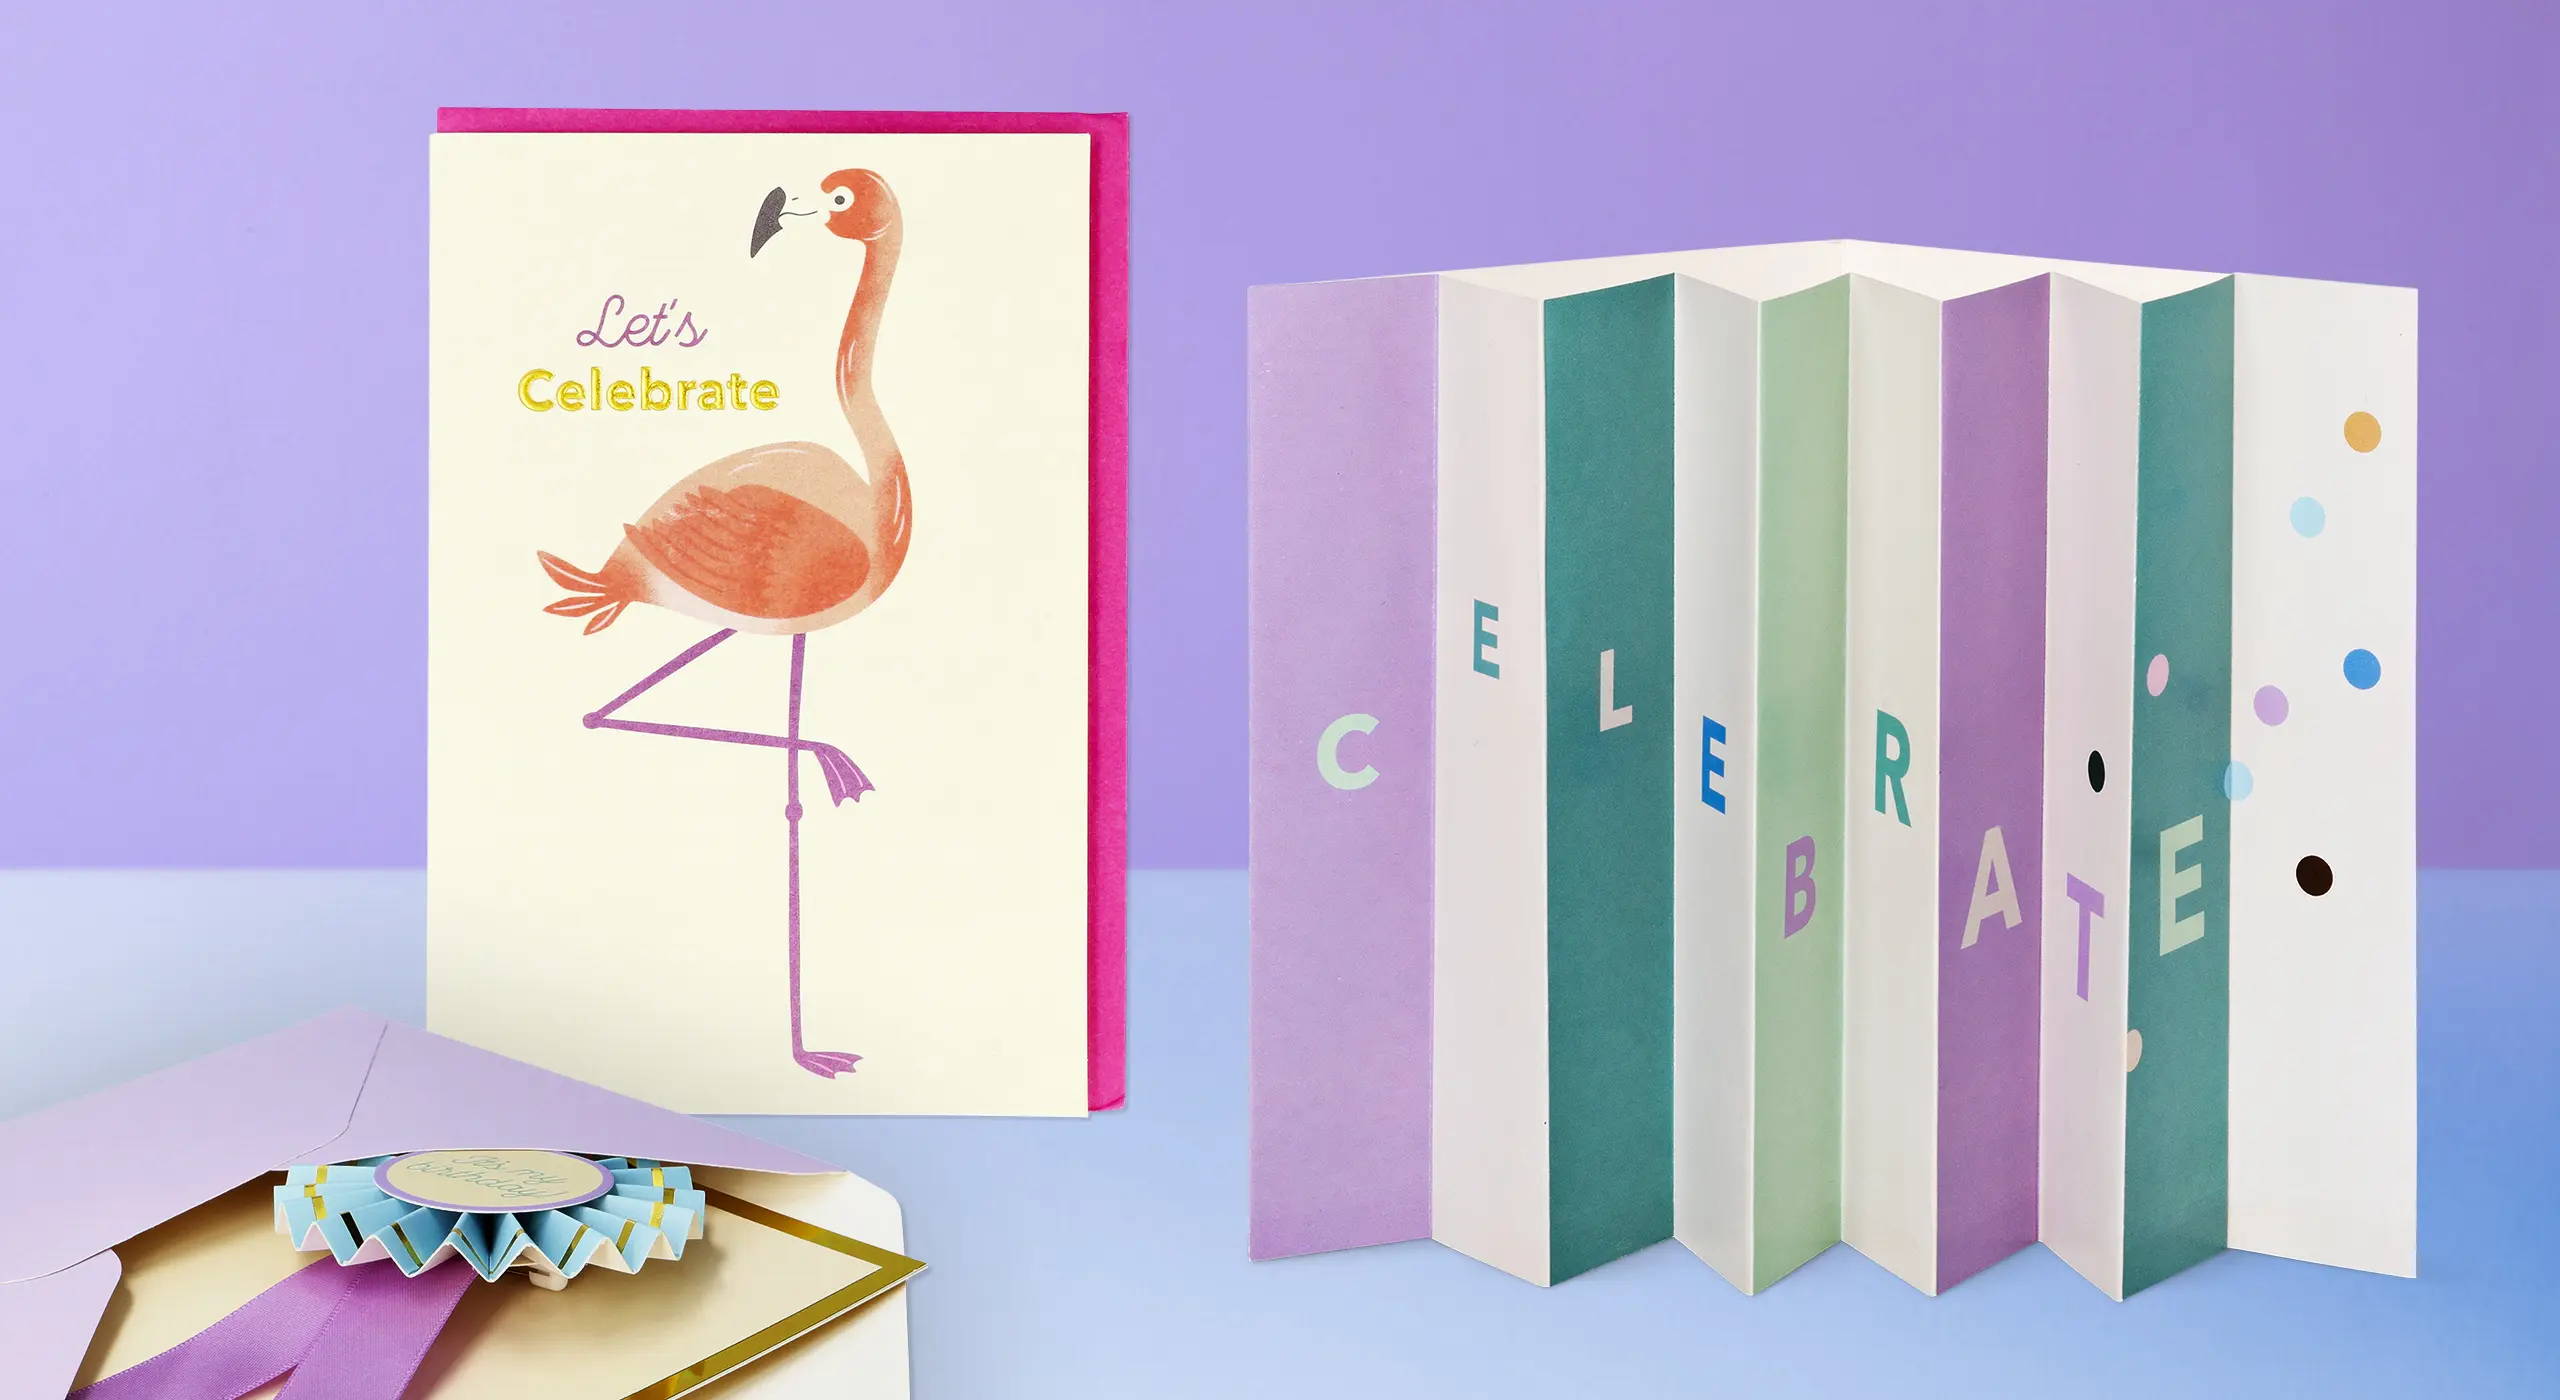 A 'Let's Celebrate' flamingo card beside accordion-fold celebration cards in pastel shades